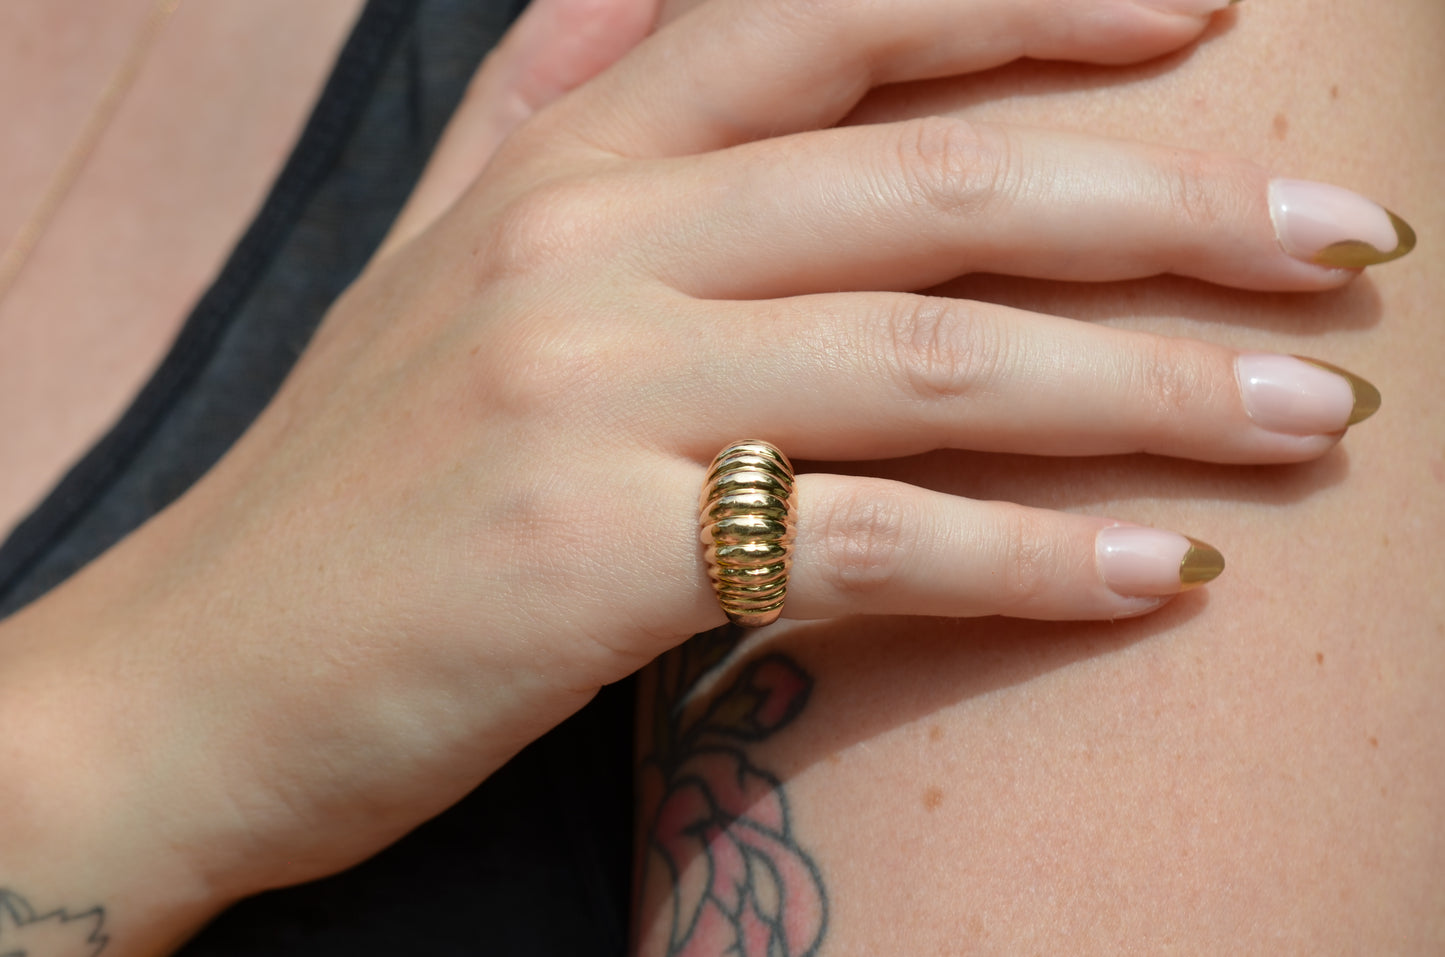 Luxe Midcentury Ribbed Bombé Ring